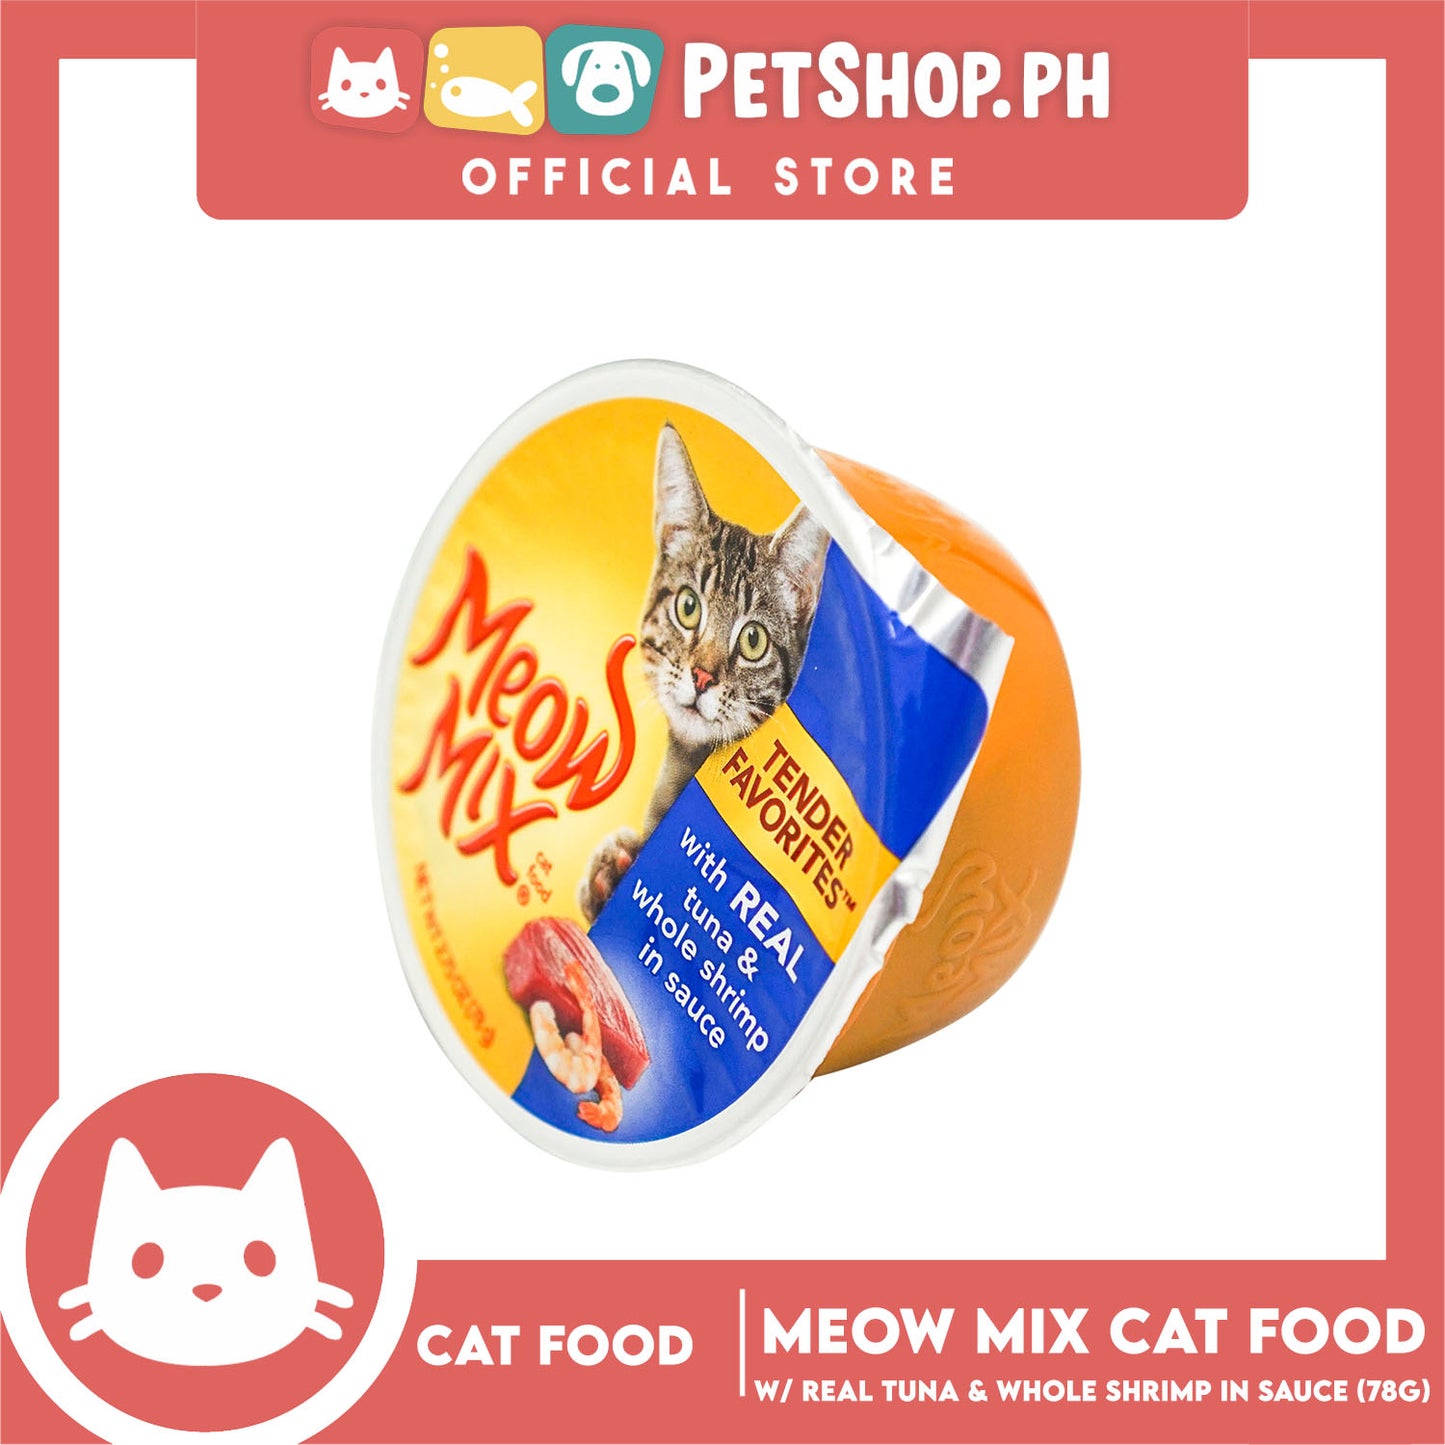 Meow Mix Tender Favorites with Real Tuna  and Whole Shrimp in Sauce 78g